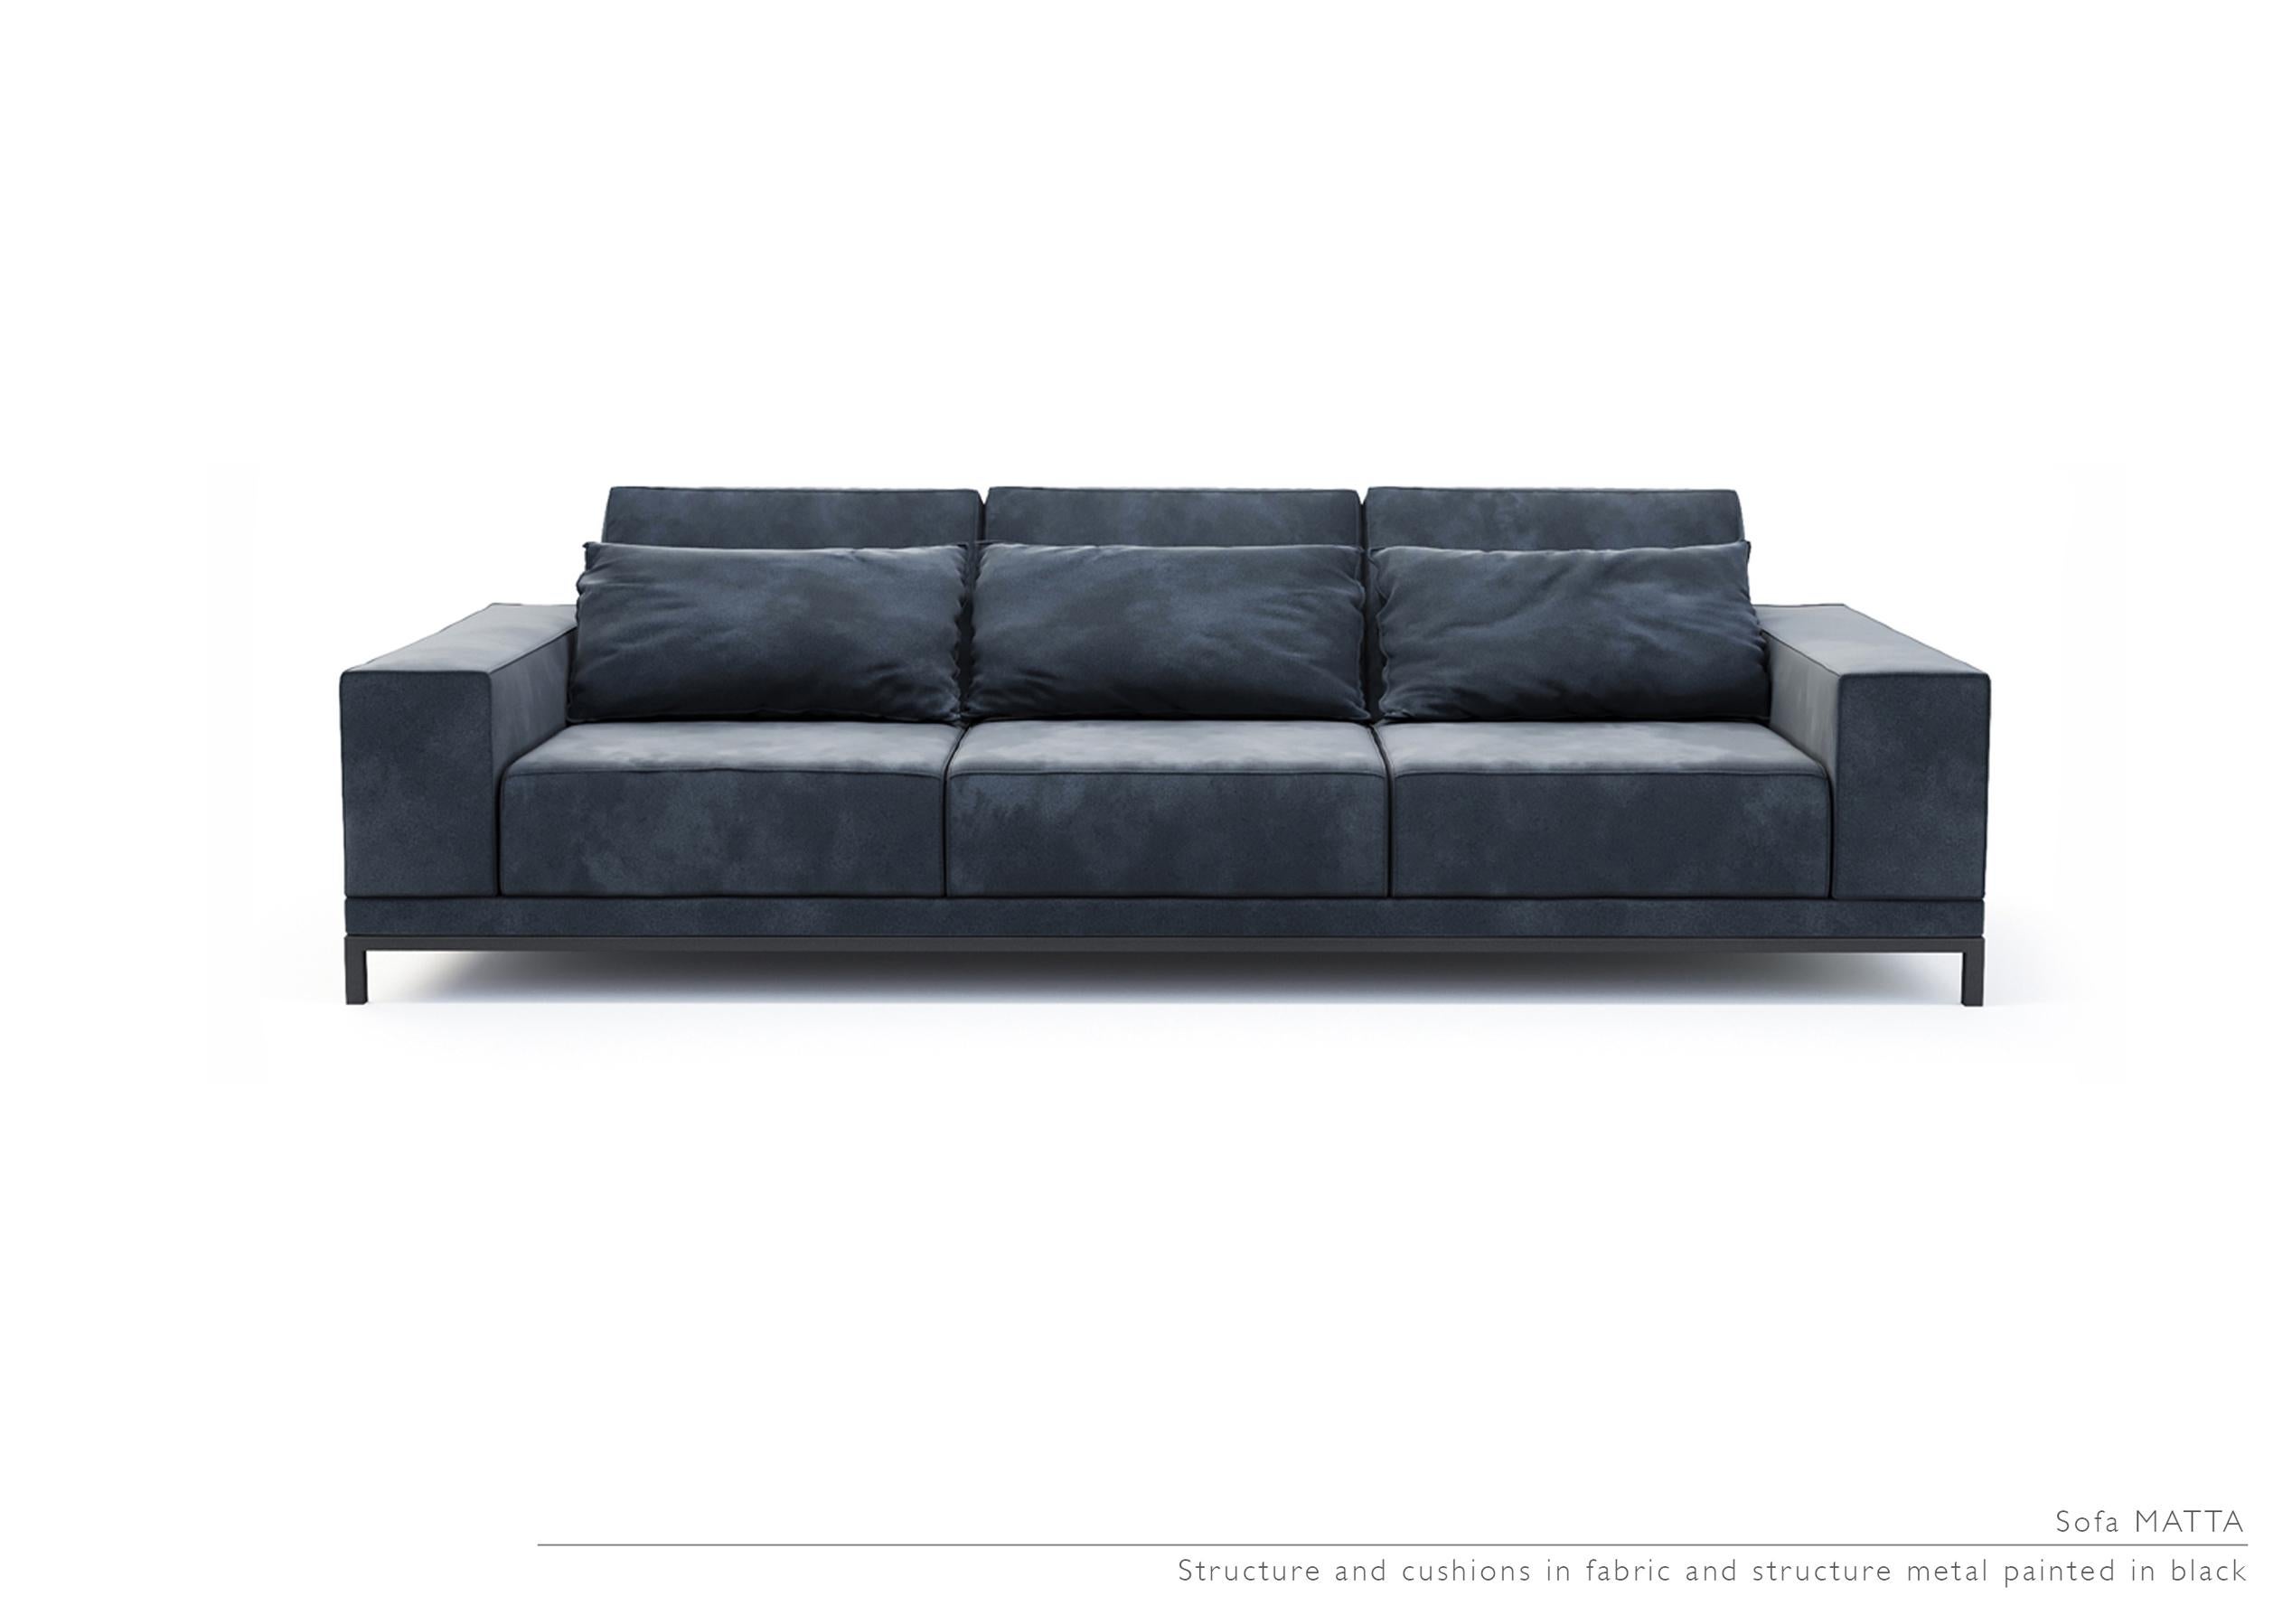 Matta sofa by LK Edition
Dimensions: 280 x 110 x H 650-840 cm
Materials: Upholstered in linen, black metal freet. 

It is with the sense of detail and requirement, this research of the exception by the selection of noble materials and his